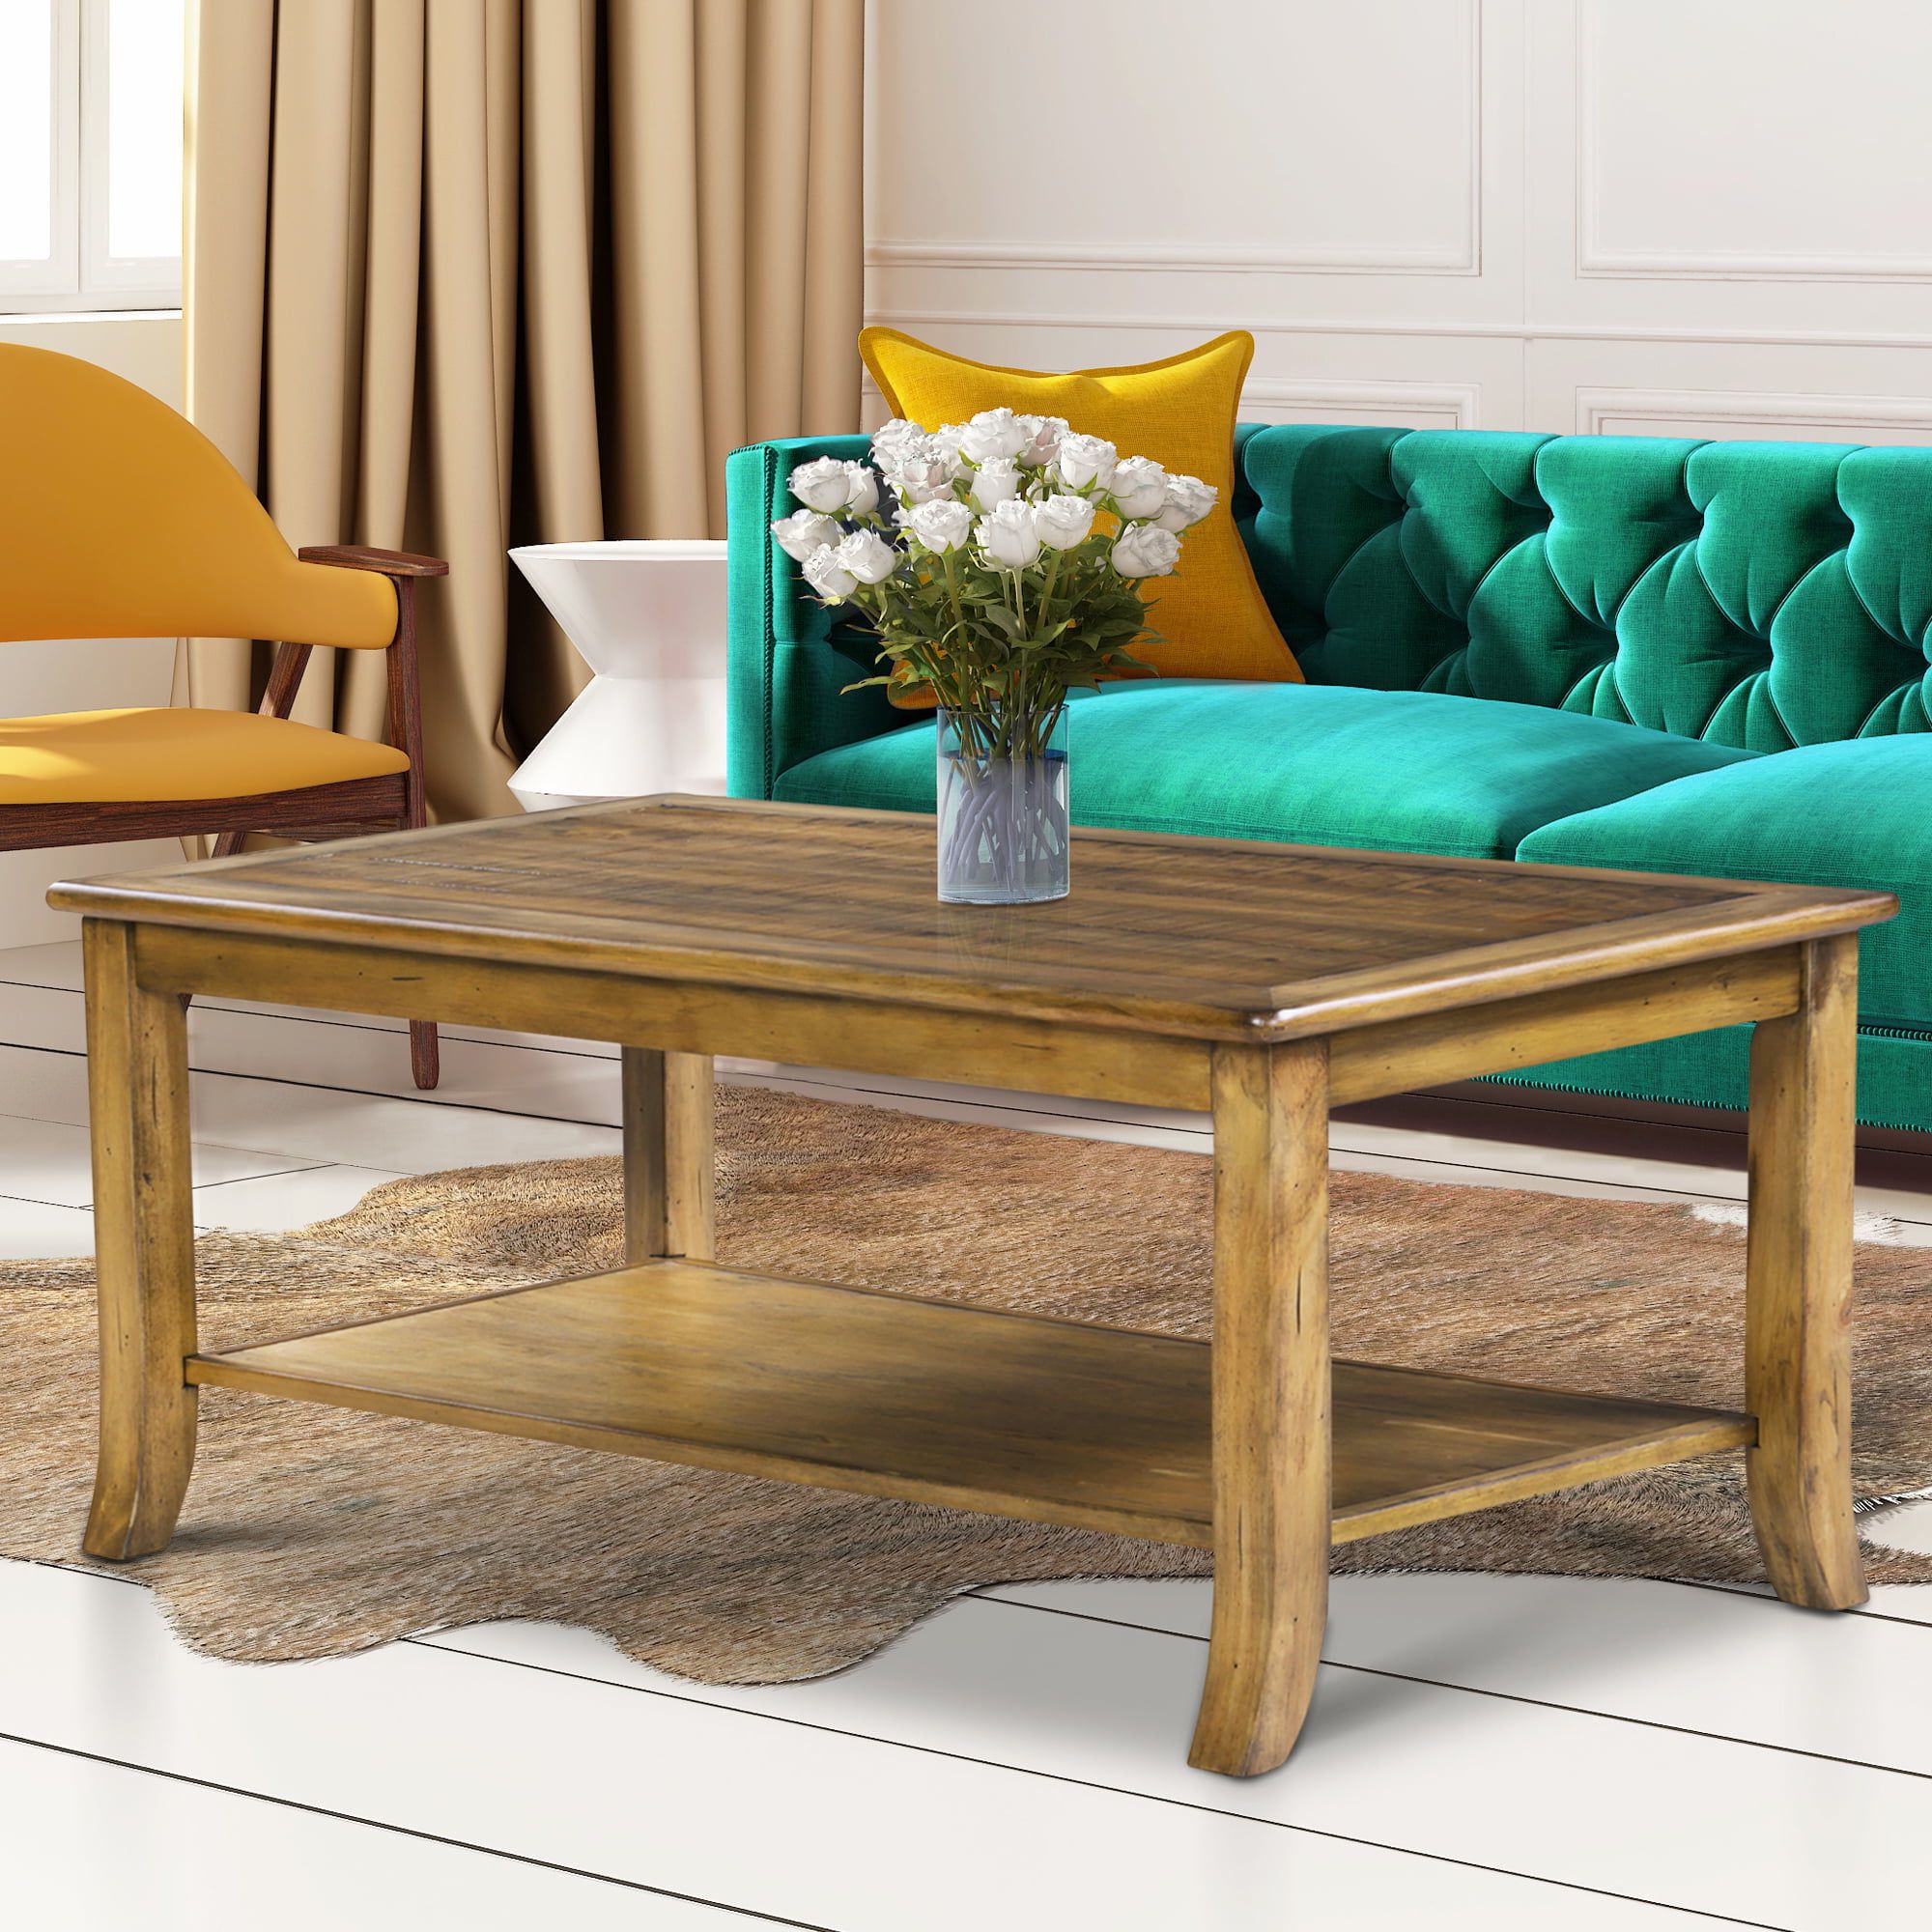 Grandrest Cocktail Coffee Table, Rustic Maple Brown – Walmart Inside Brown Rustic Coffee Tables (Gallery 4 of 20)